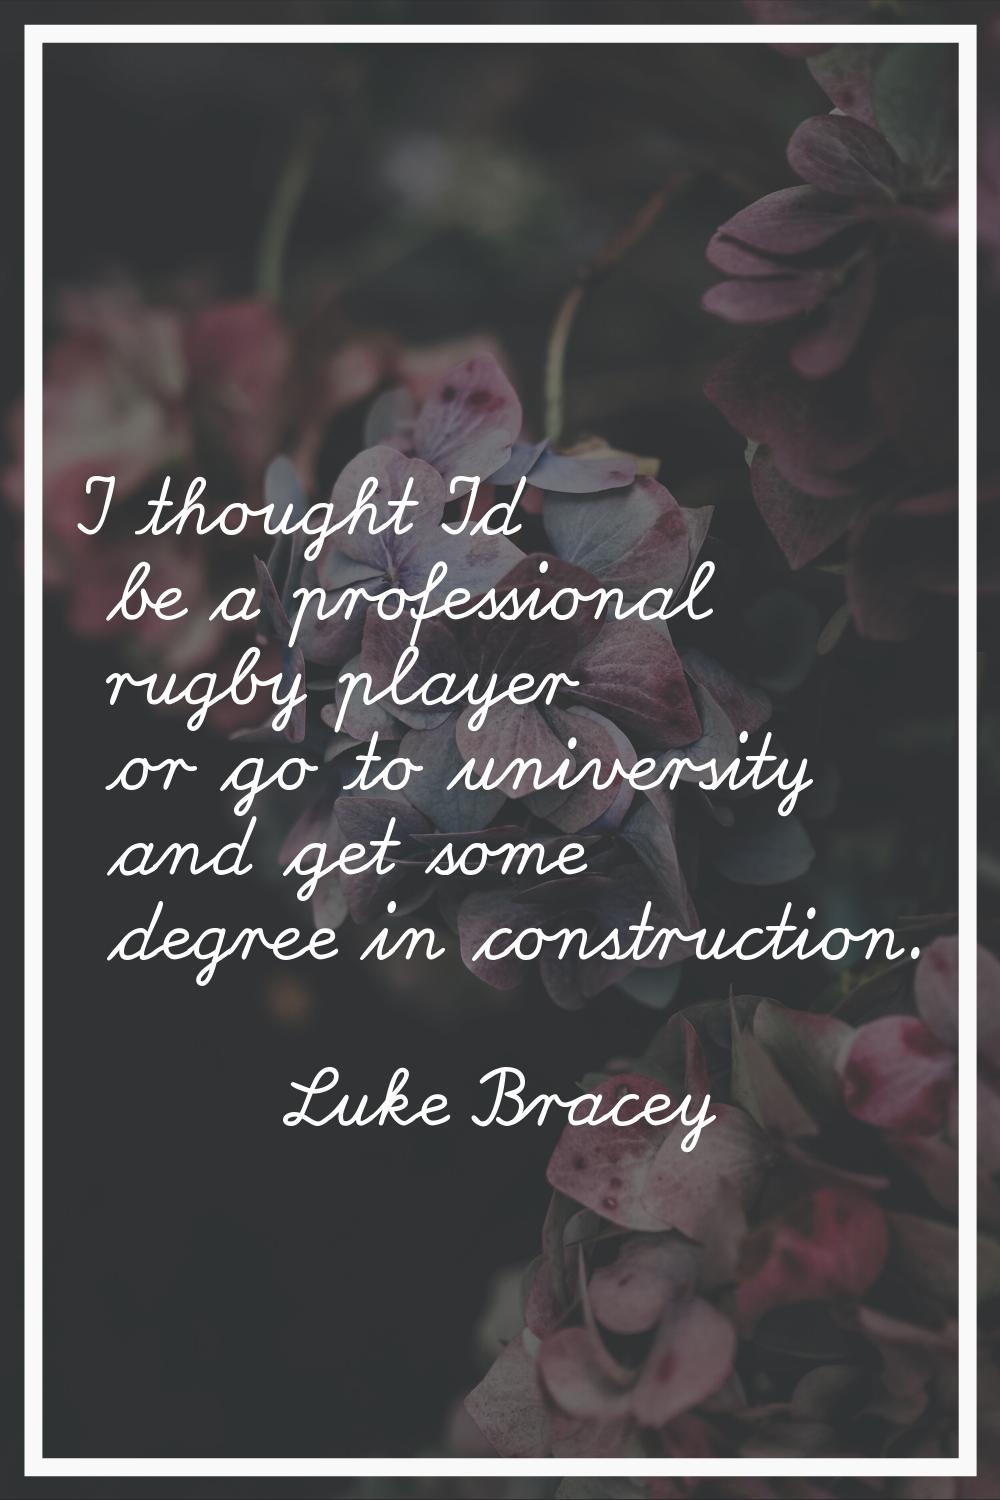 I thought I'd be a professional rugby player or go to university and get some degree in constructio